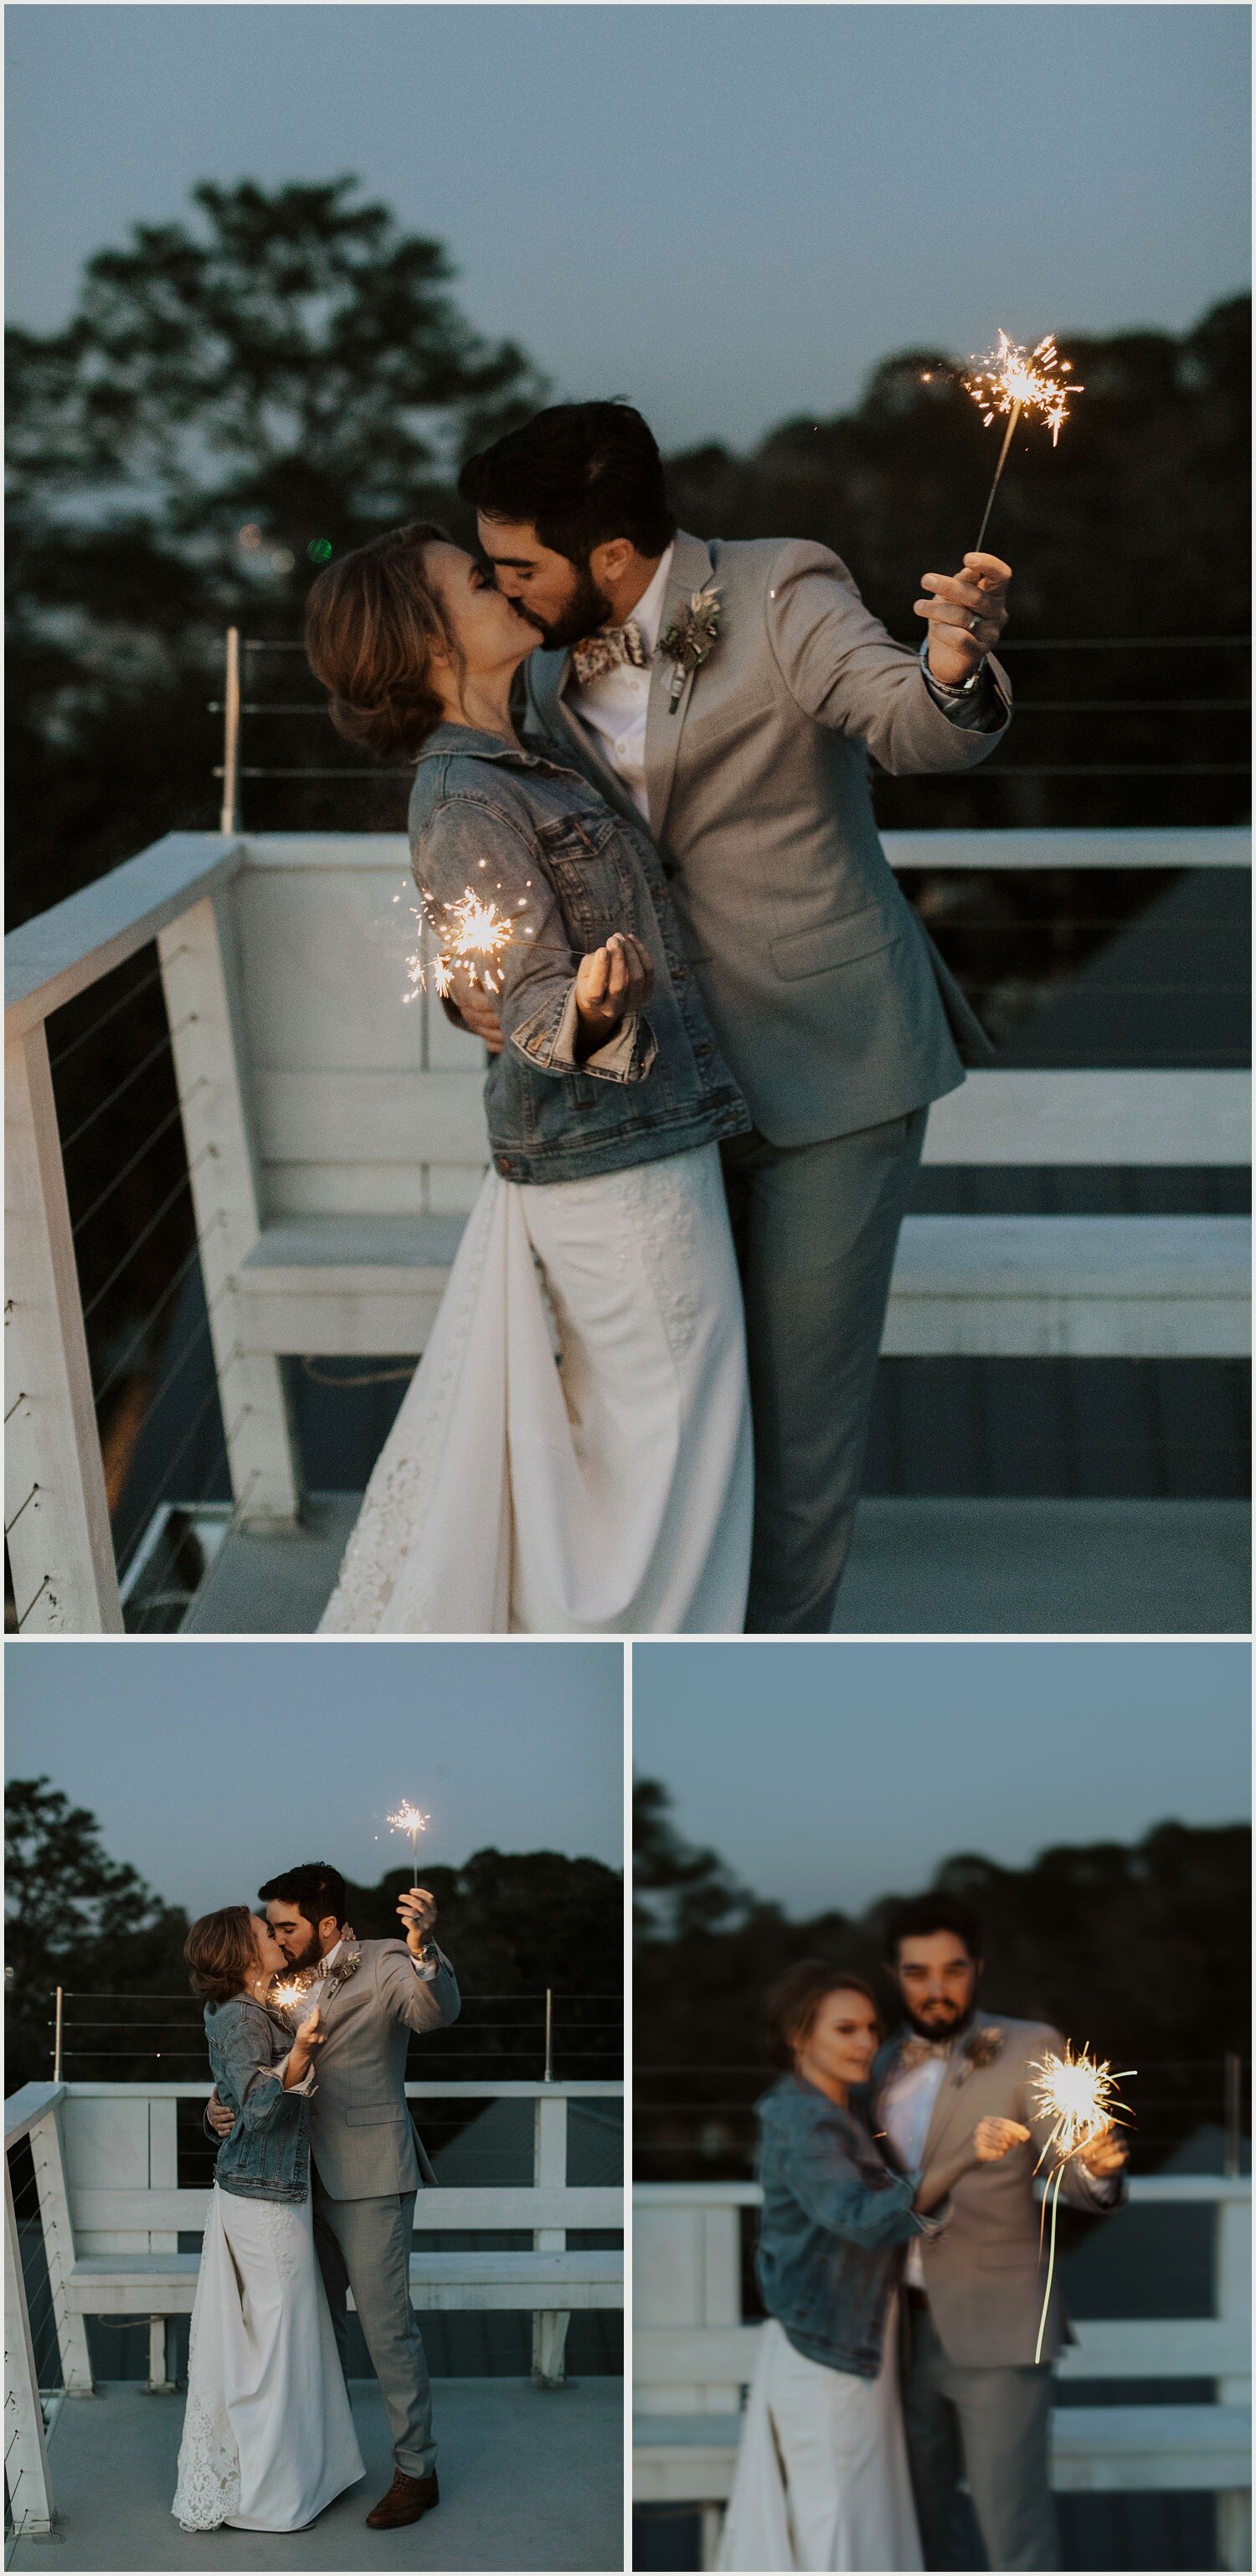 Bride and Groom Sunset Portraits